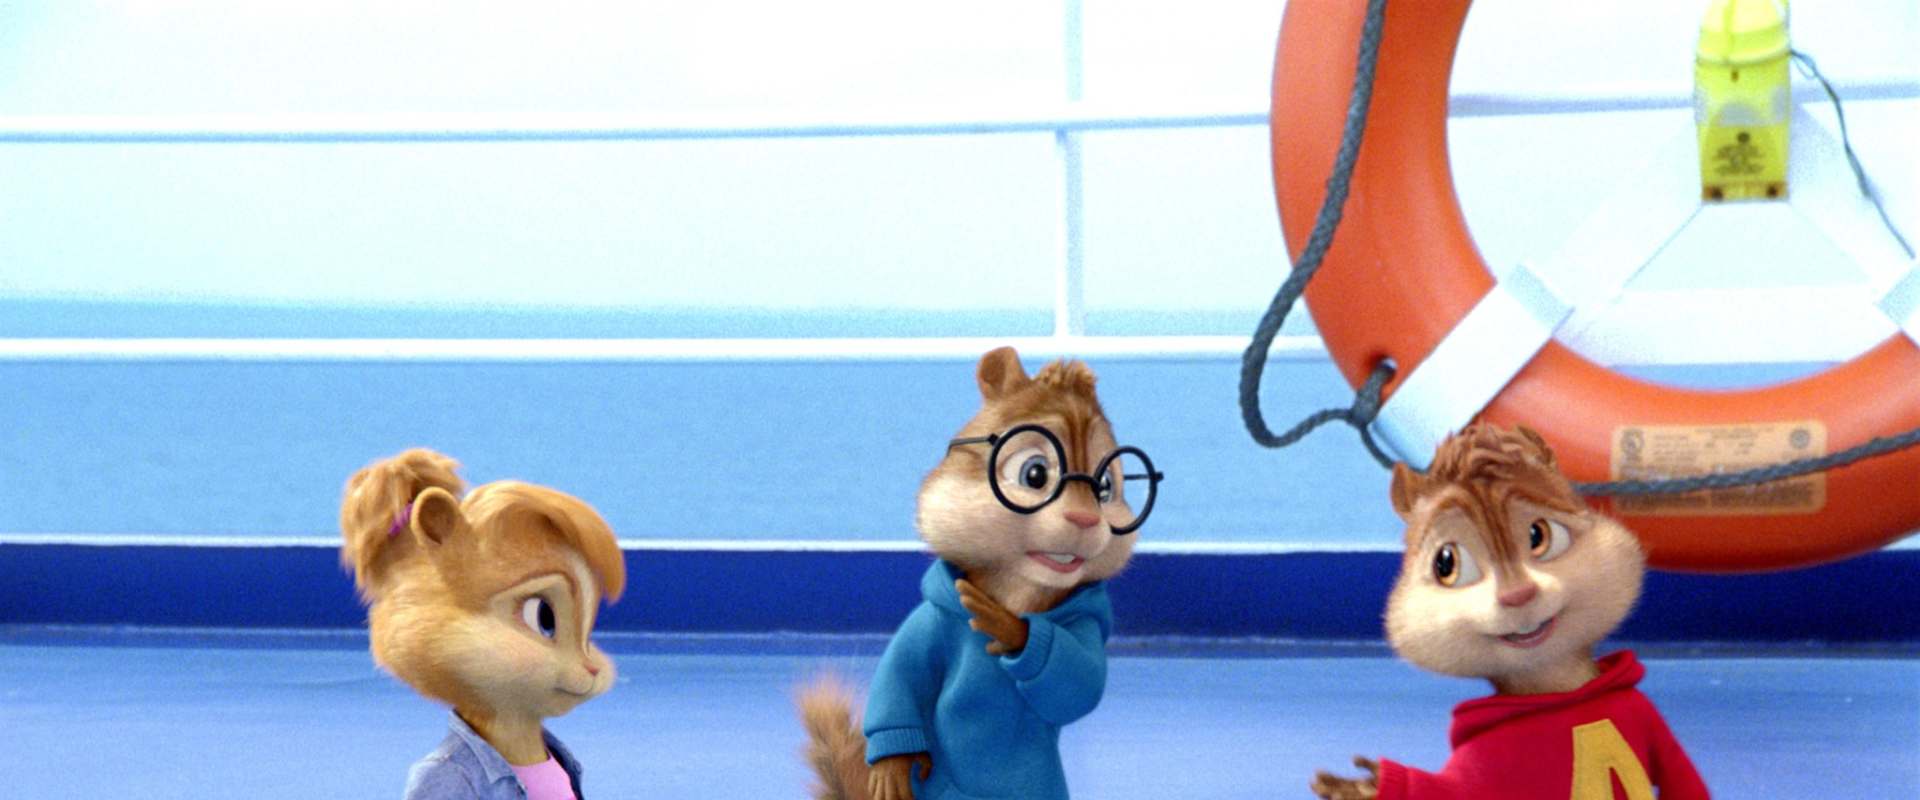 Alvin and the Chipmunks: Chipwrecked background 1